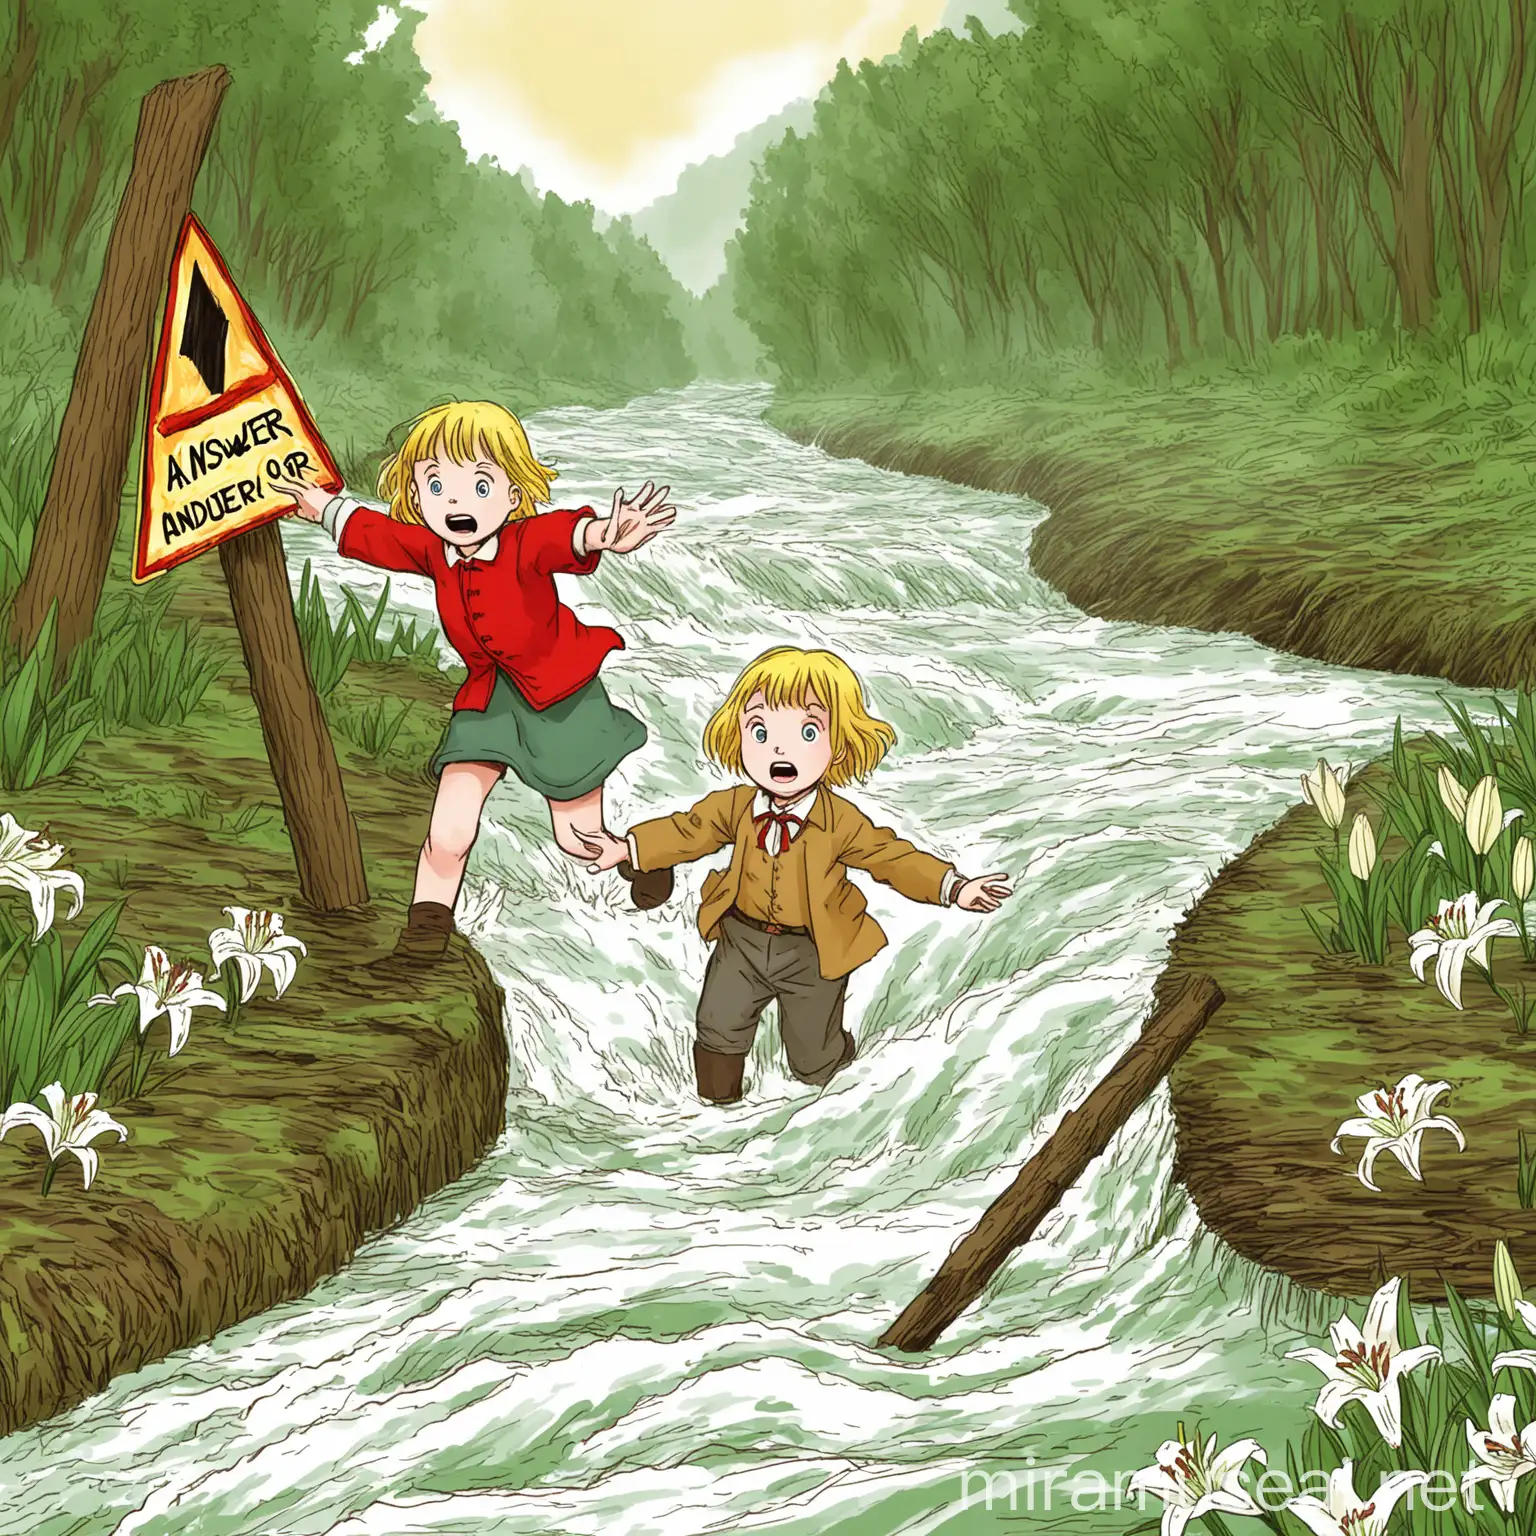 Lily and Arthur reached a rushing river blocking their path. Suddenly, the river boomed, "Halt! Answer my riddles or find another way!" 

